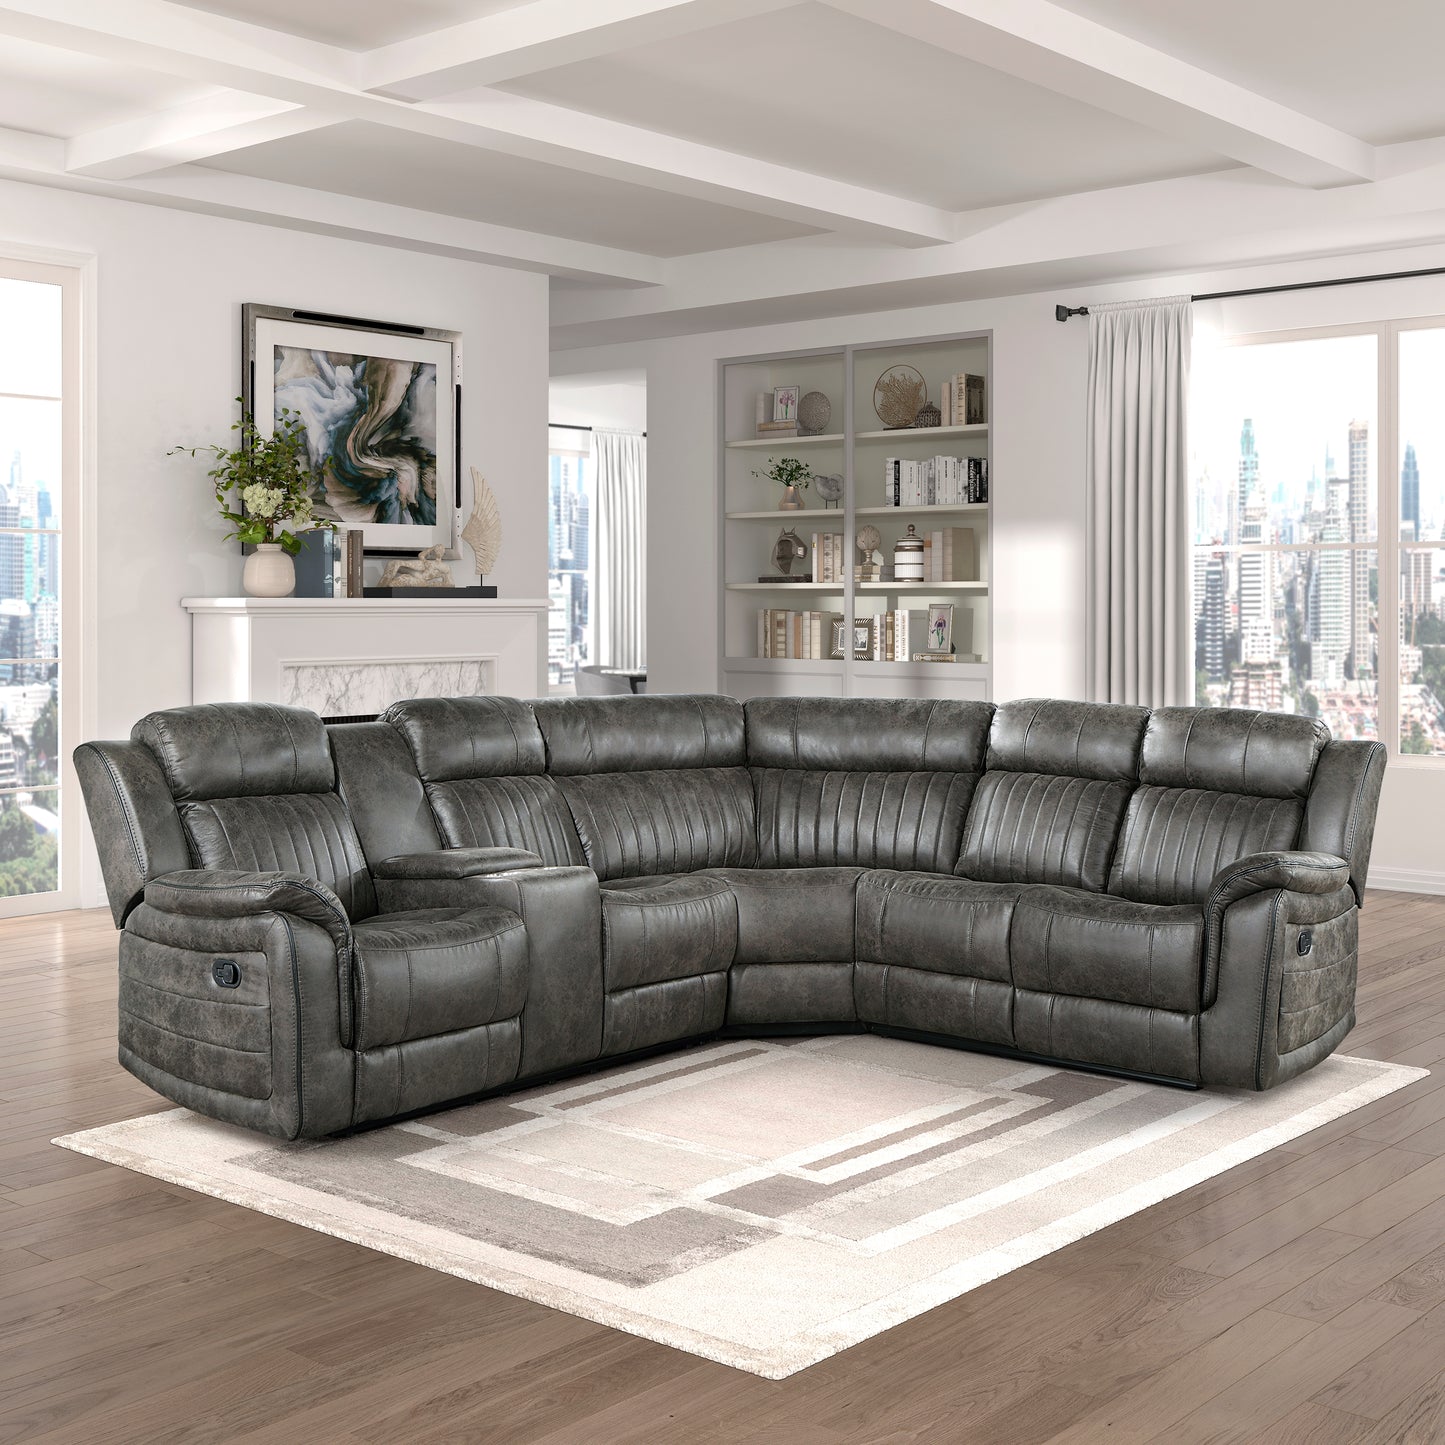 Centeroak 3-Piece Reclining Sectional with Left Console GREY